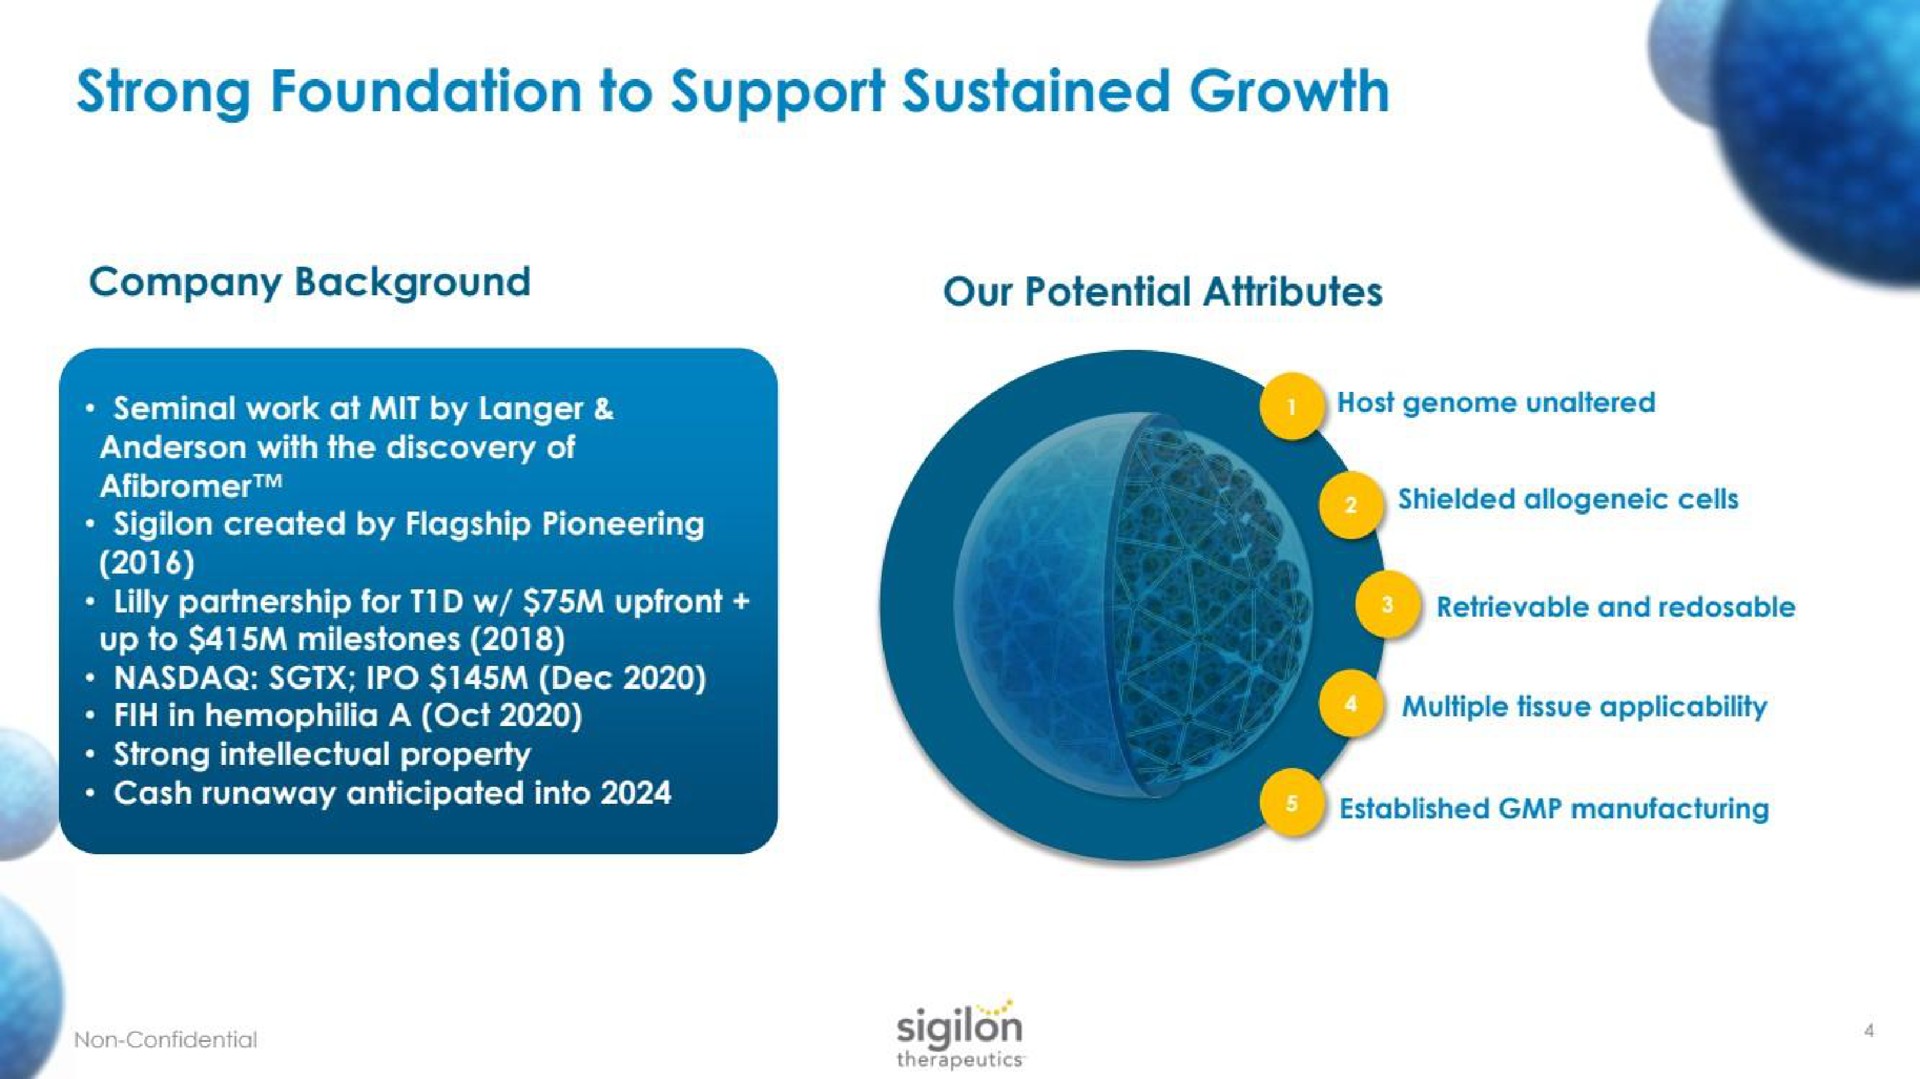 strong foundation to support sustained growth | Sigilon Therapeutics